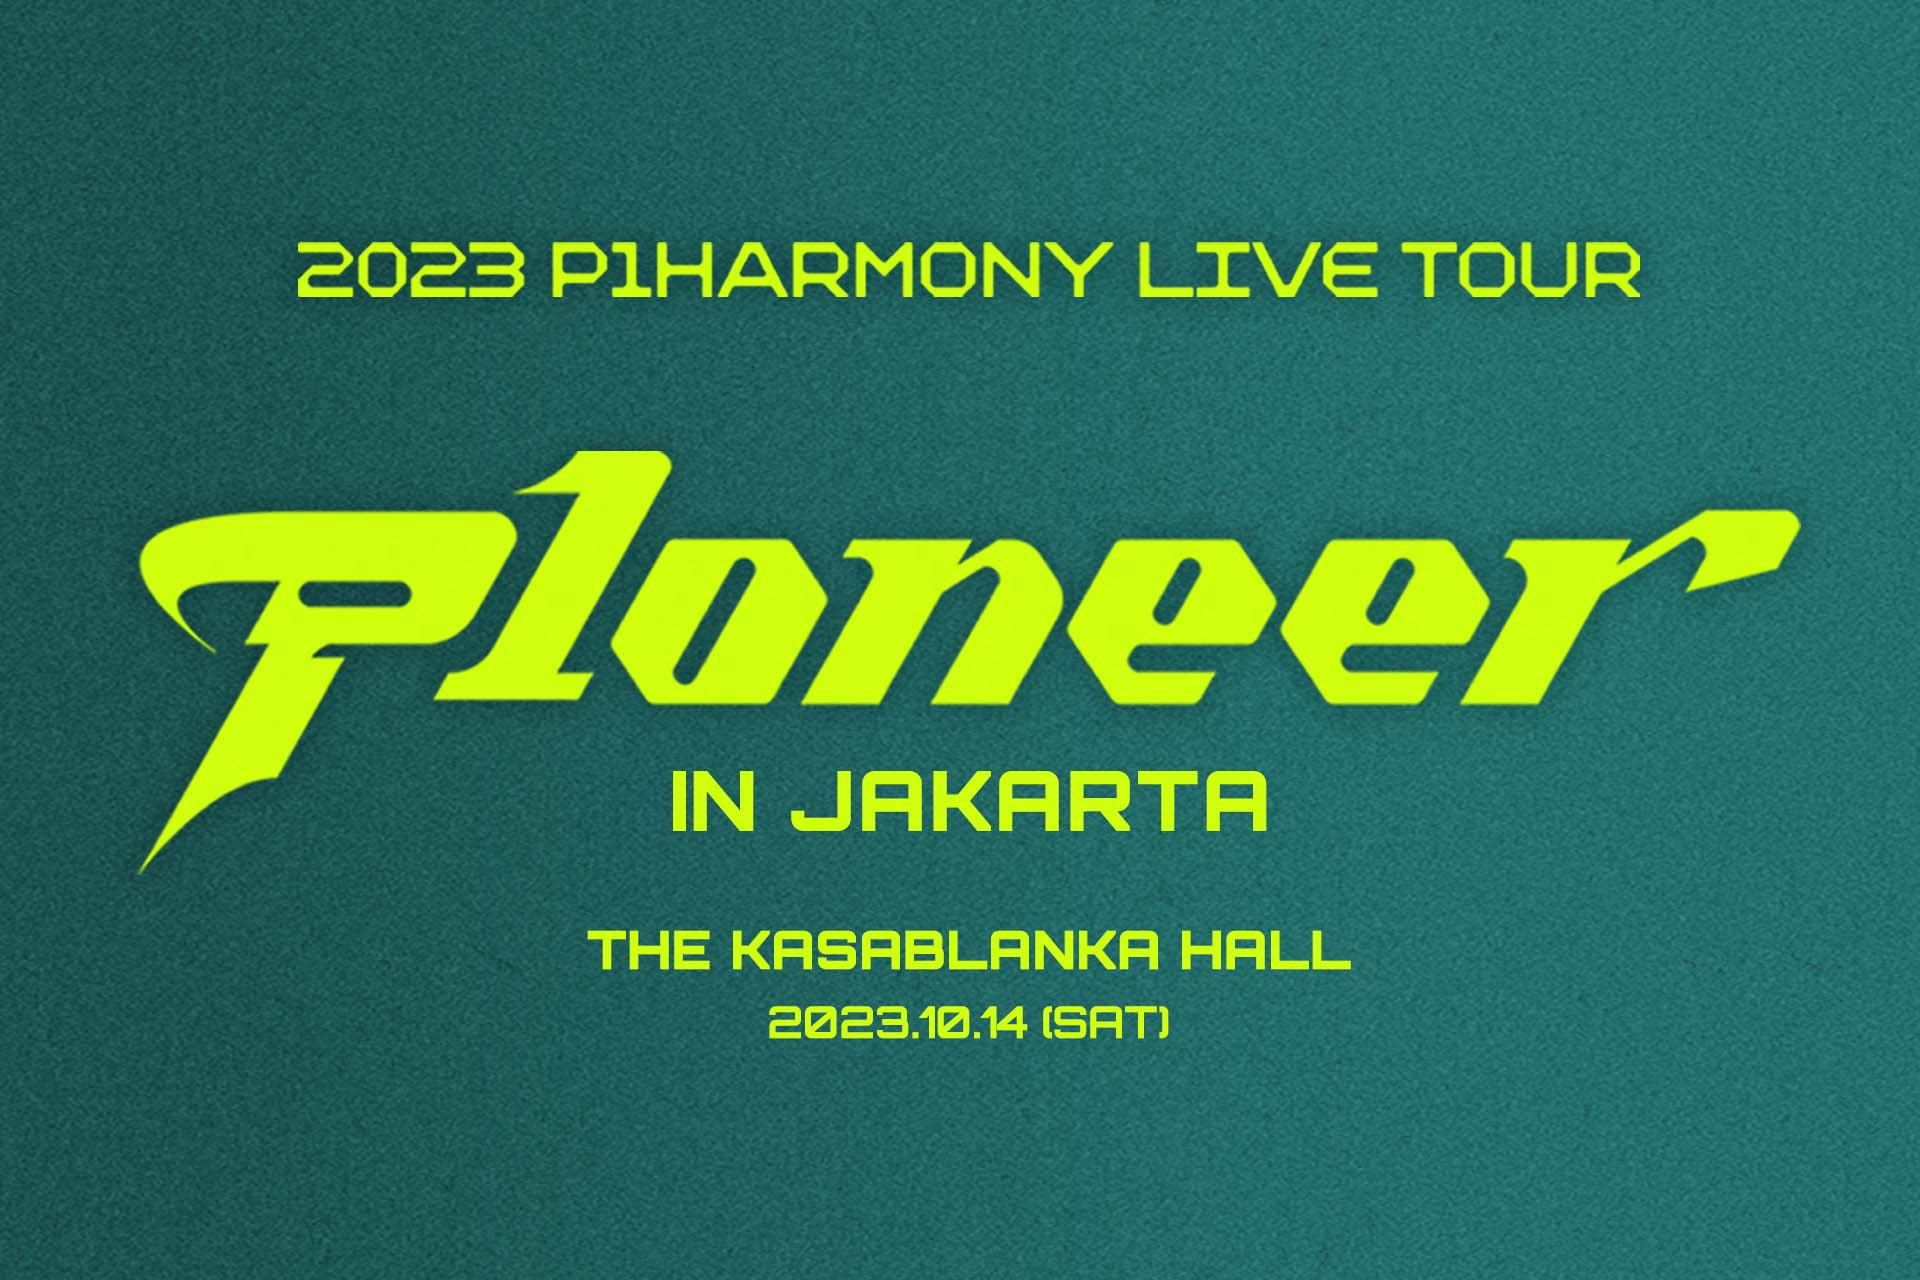 Get Ticket P1HARMONY LIVE TOUR [P1USTAGE HP1ONEER] IN JAKARTA Promo